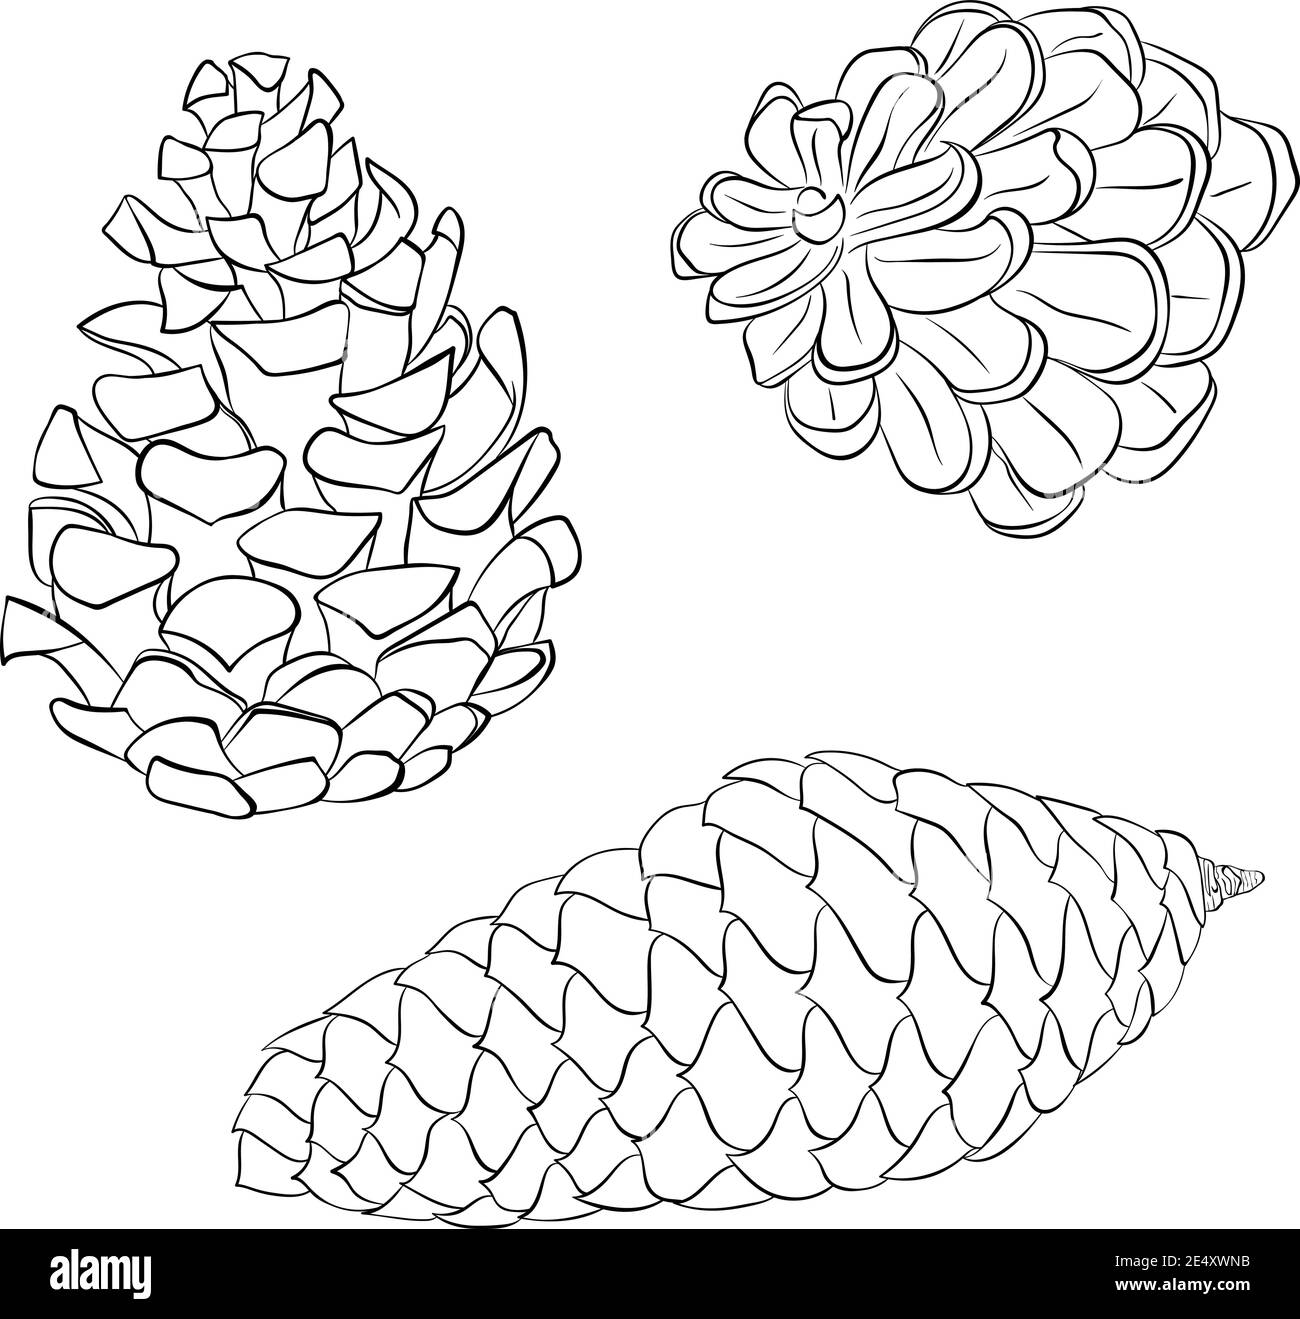 Vector hand drawn outline illustration of pine or fir cone set isolated on white background new